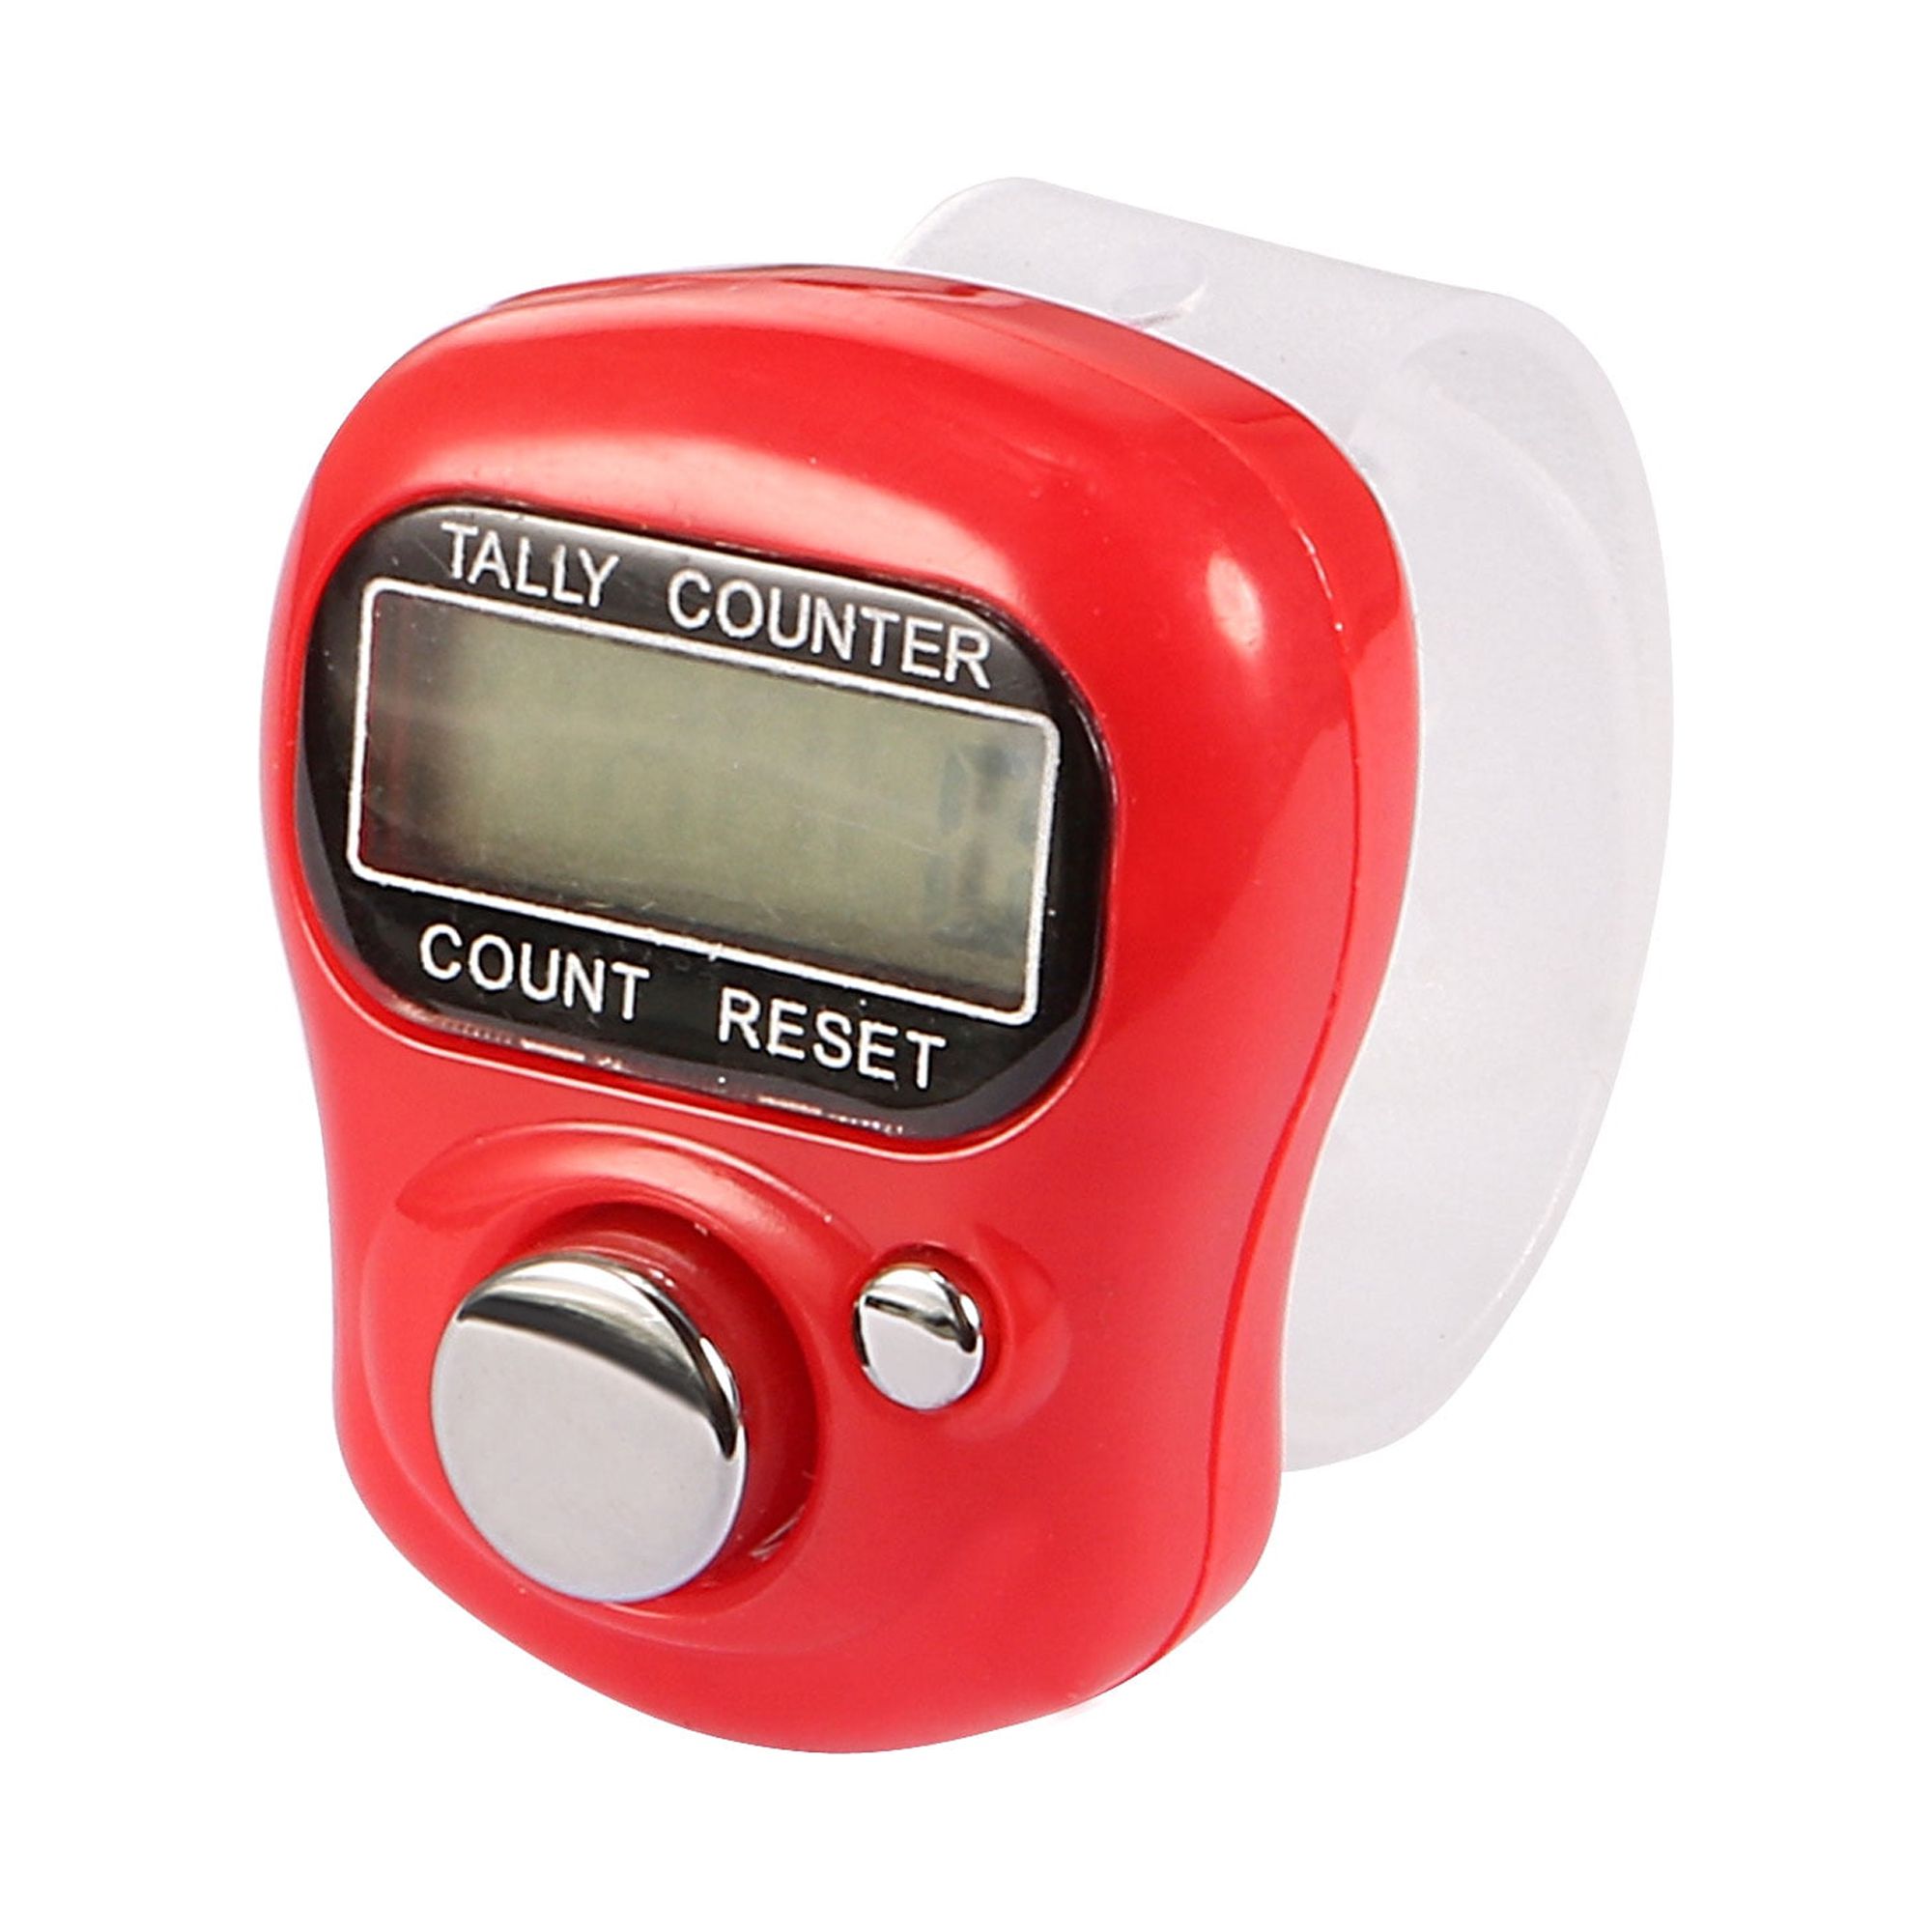 Unique Bargains Manual Red Electronic Hand Finger Tally Counter 0-99999 - image 1 of 1